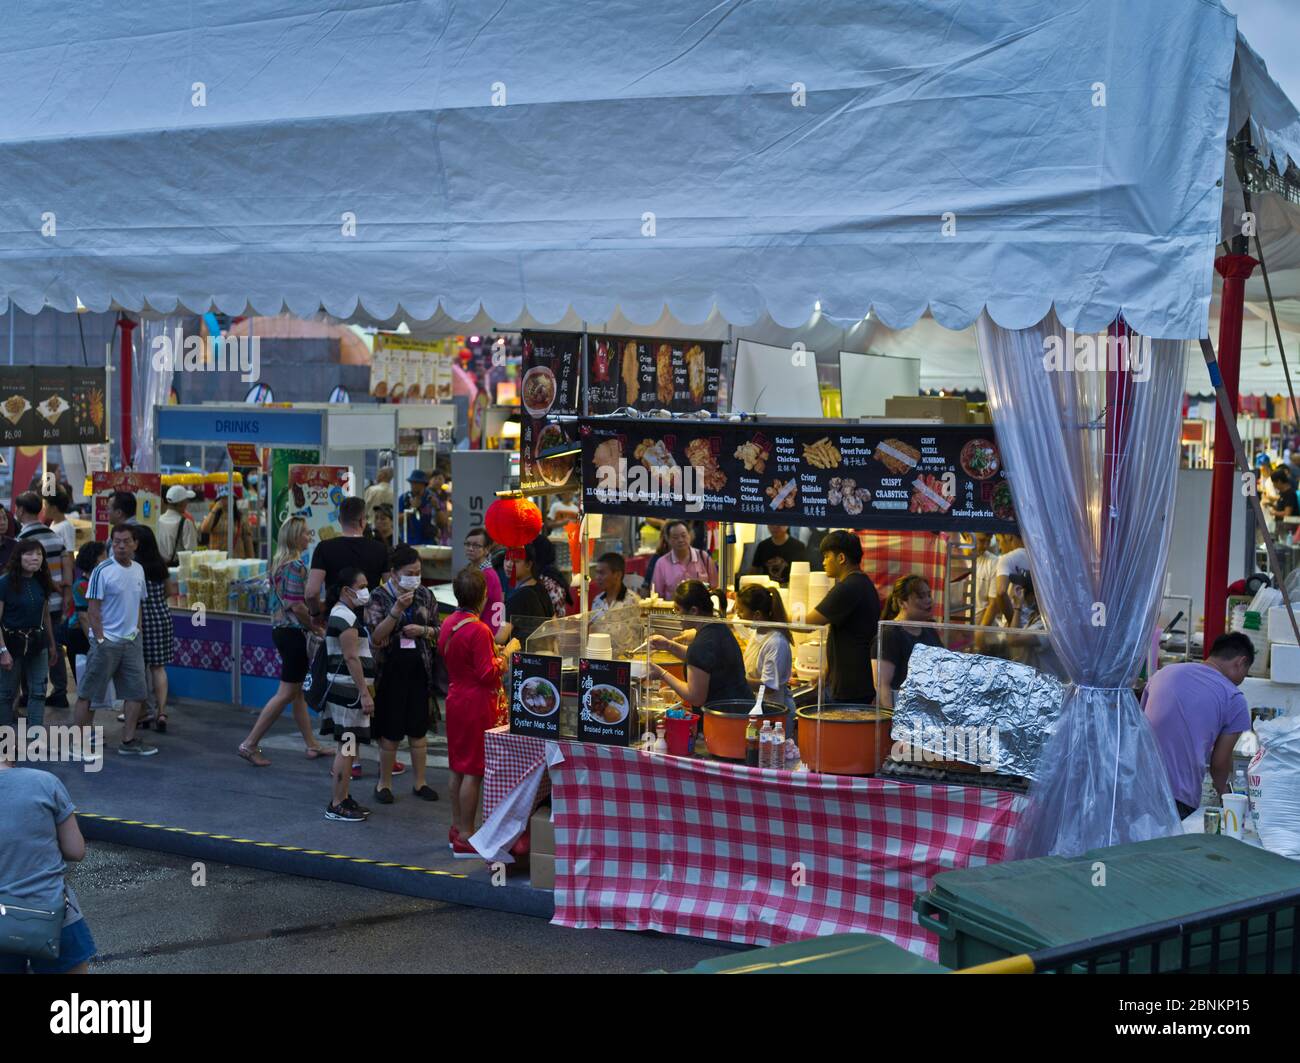 dh Chinese New Year MARINA BAY SINGAPORE Local people fastfood takeaway food stalls market stall Stock Photo